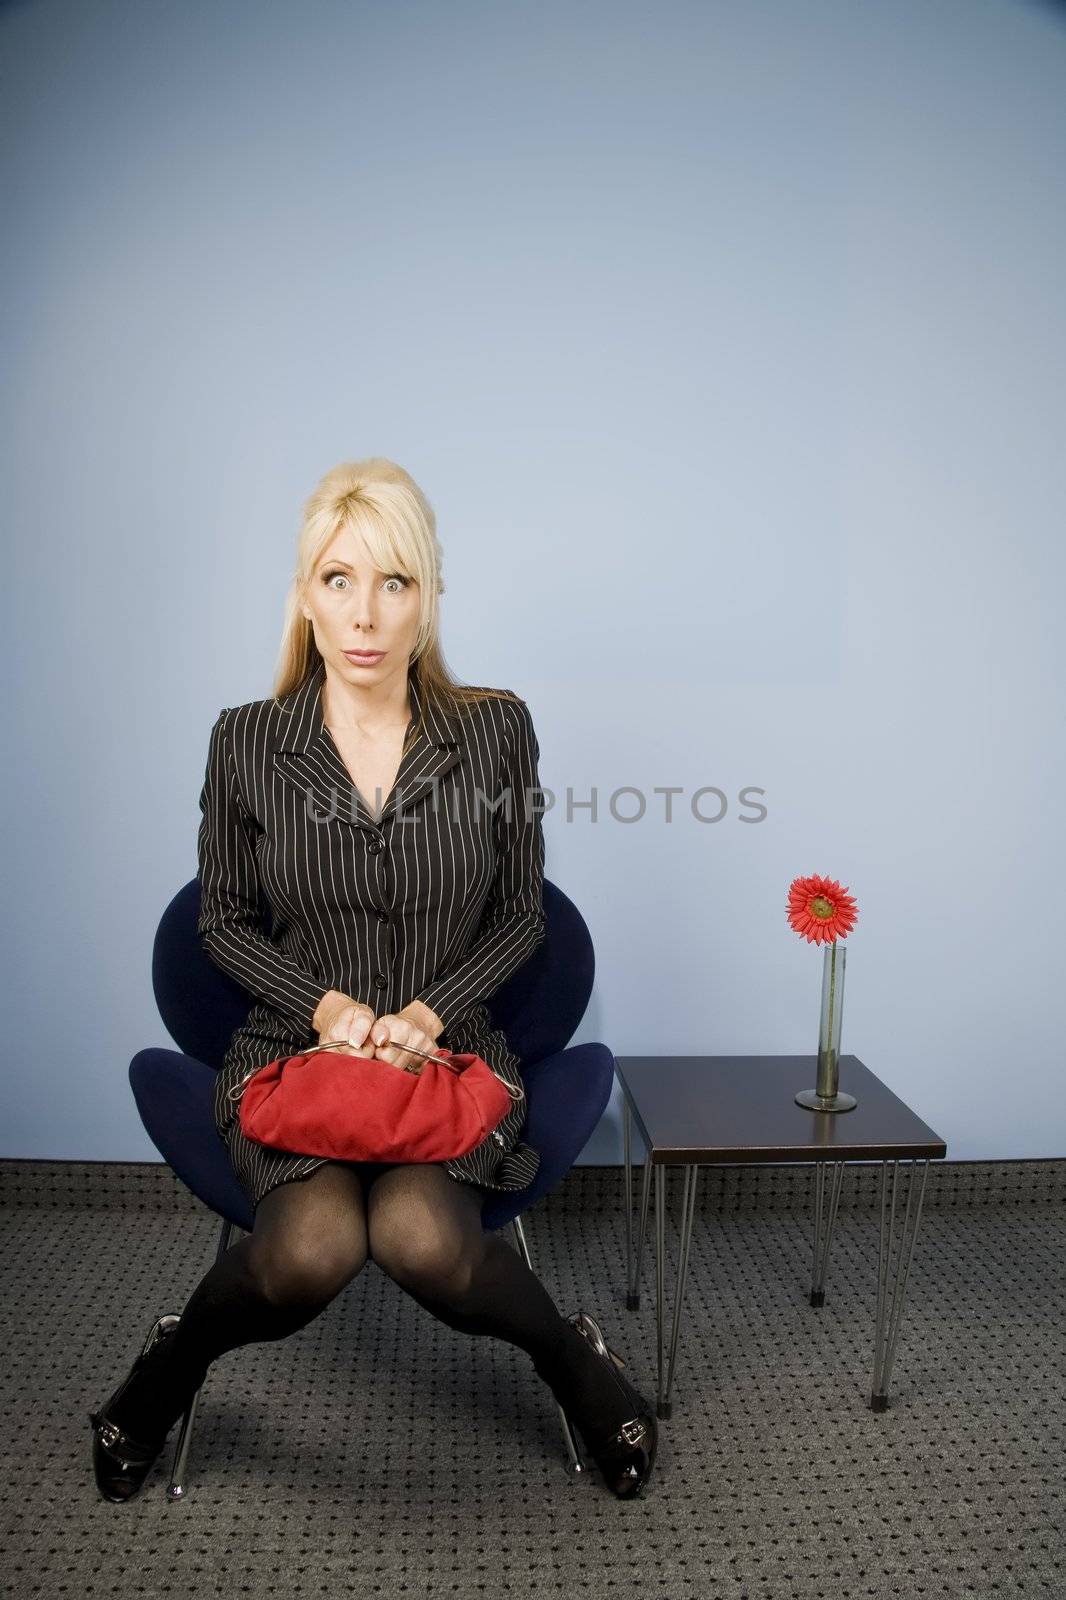 Beautiful blonde woman waiting with a worried look on her face